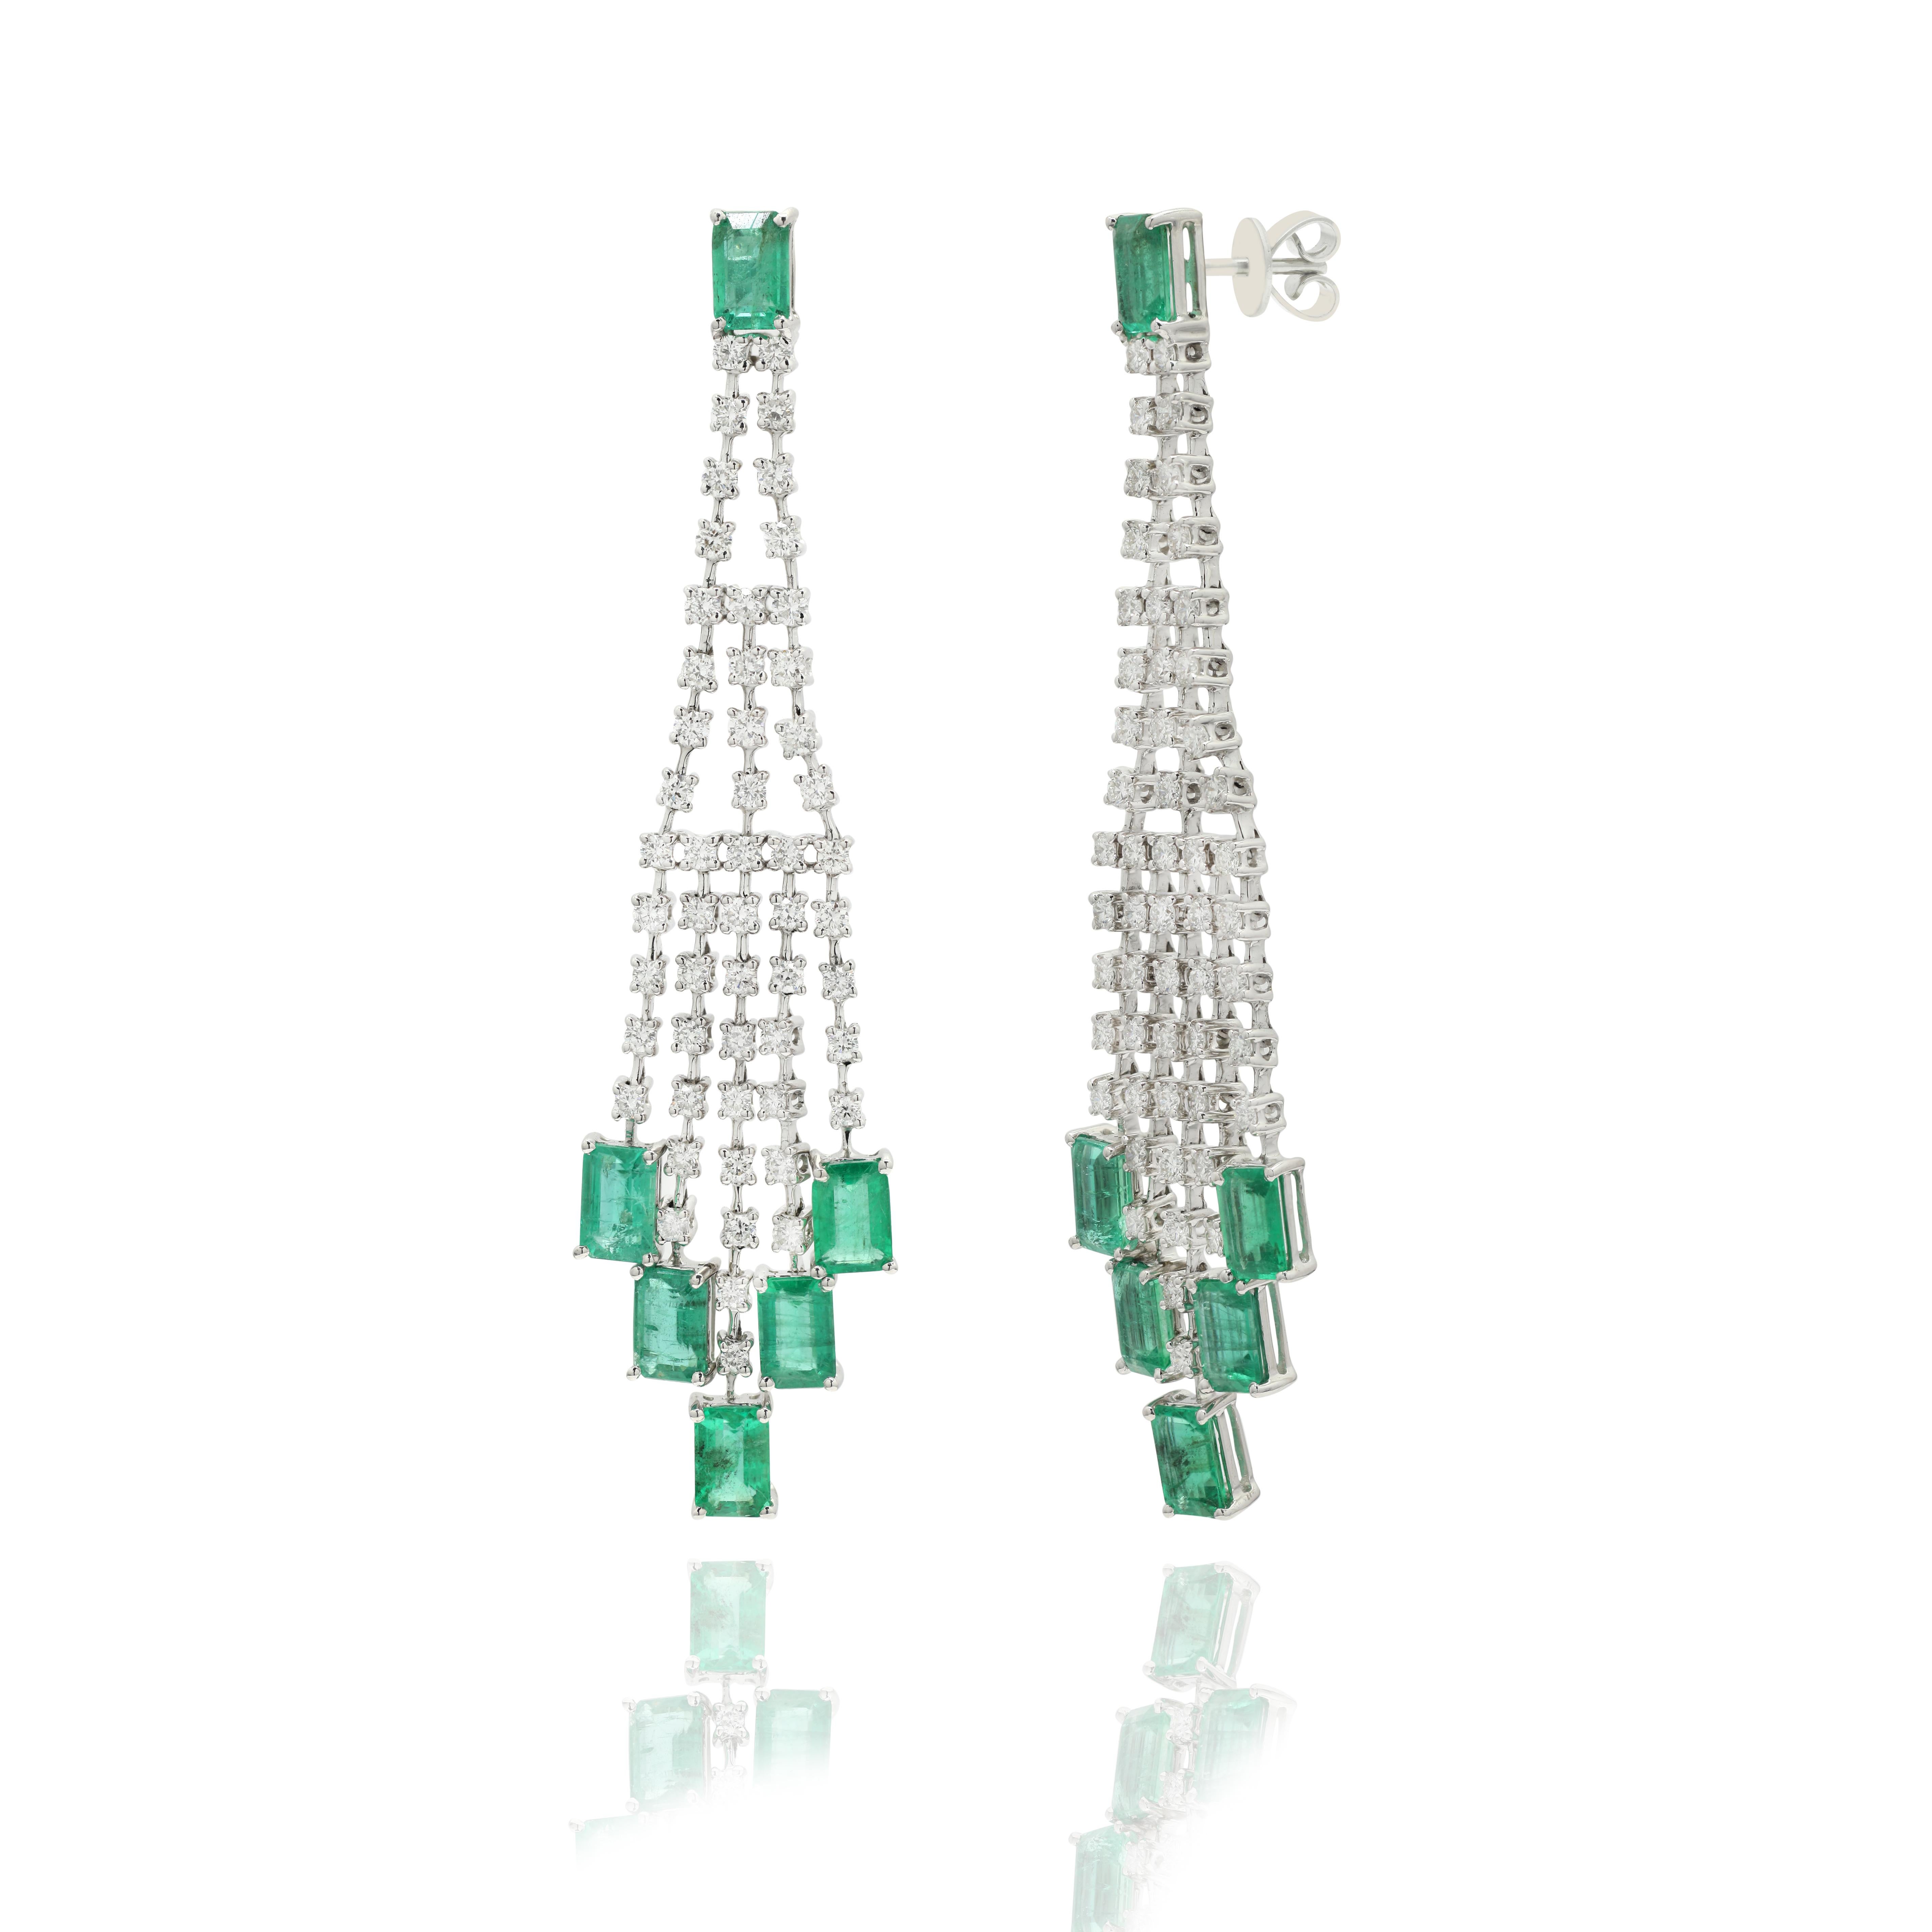 Artist Natural 5.43 Ct Emerald Dazzling Long Earrings in 14K White Gold with Diamonds For Sale